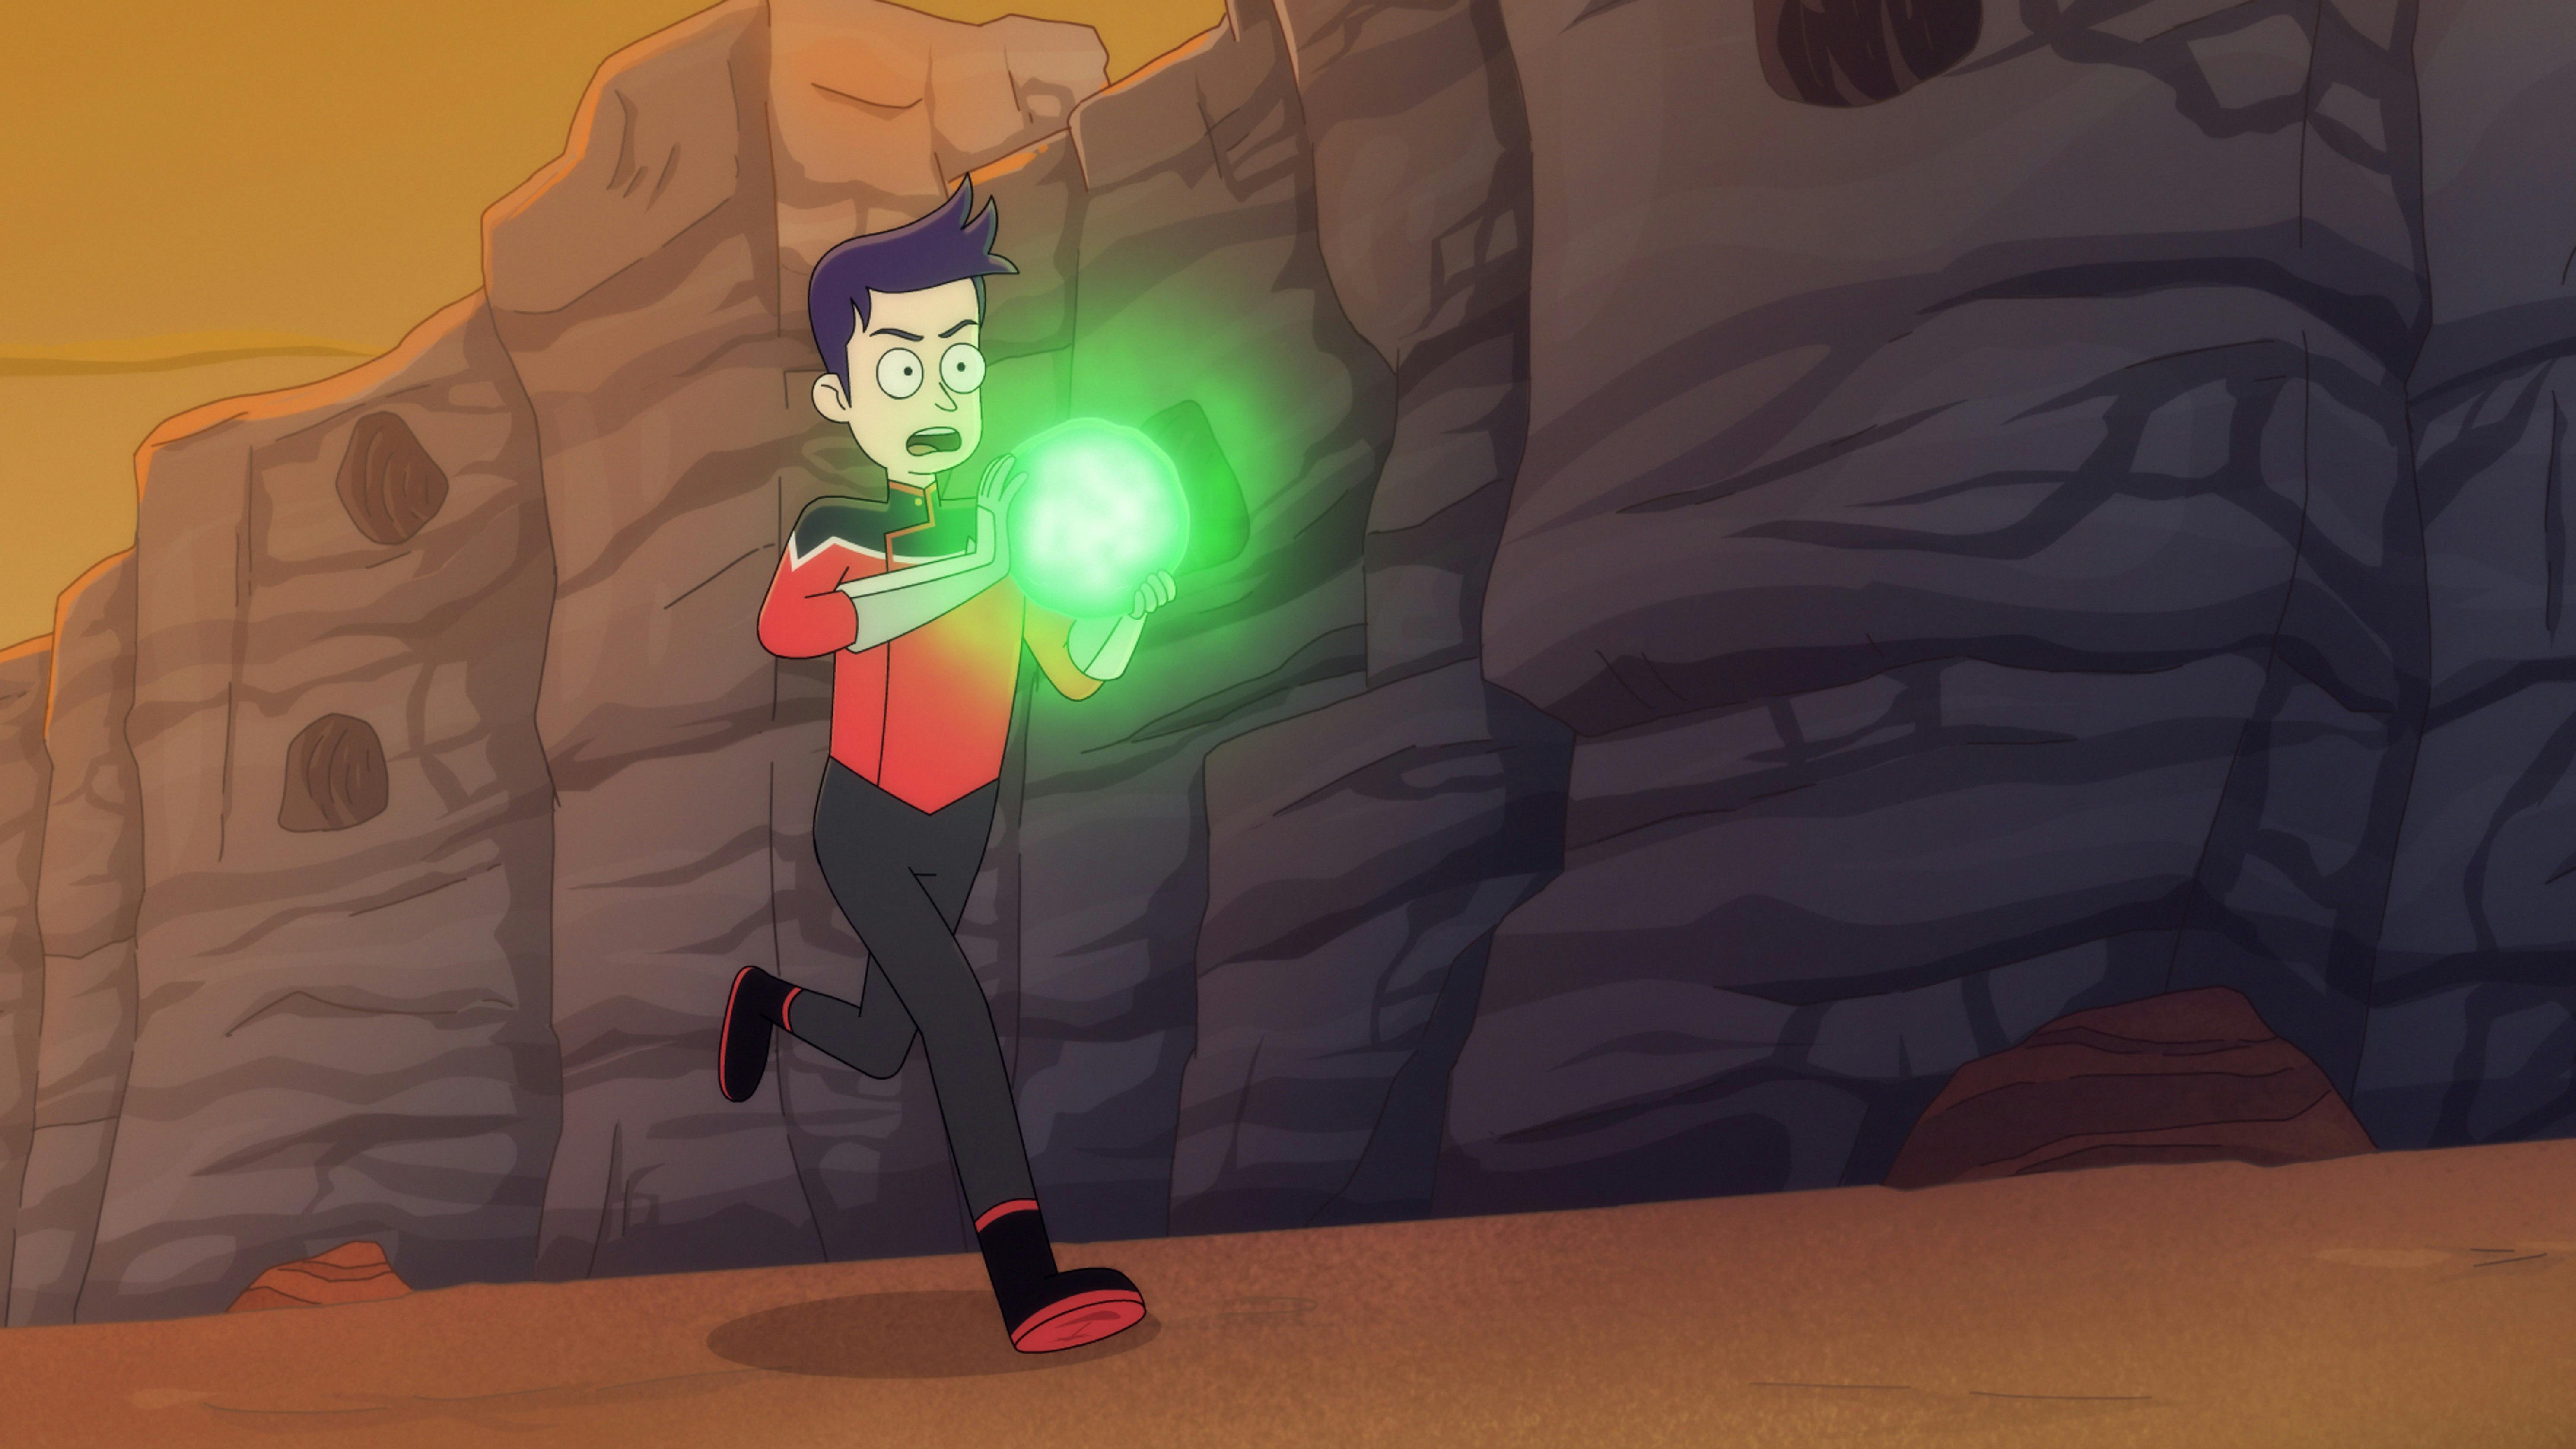 Boimler runs while carrying a glowing green orb.